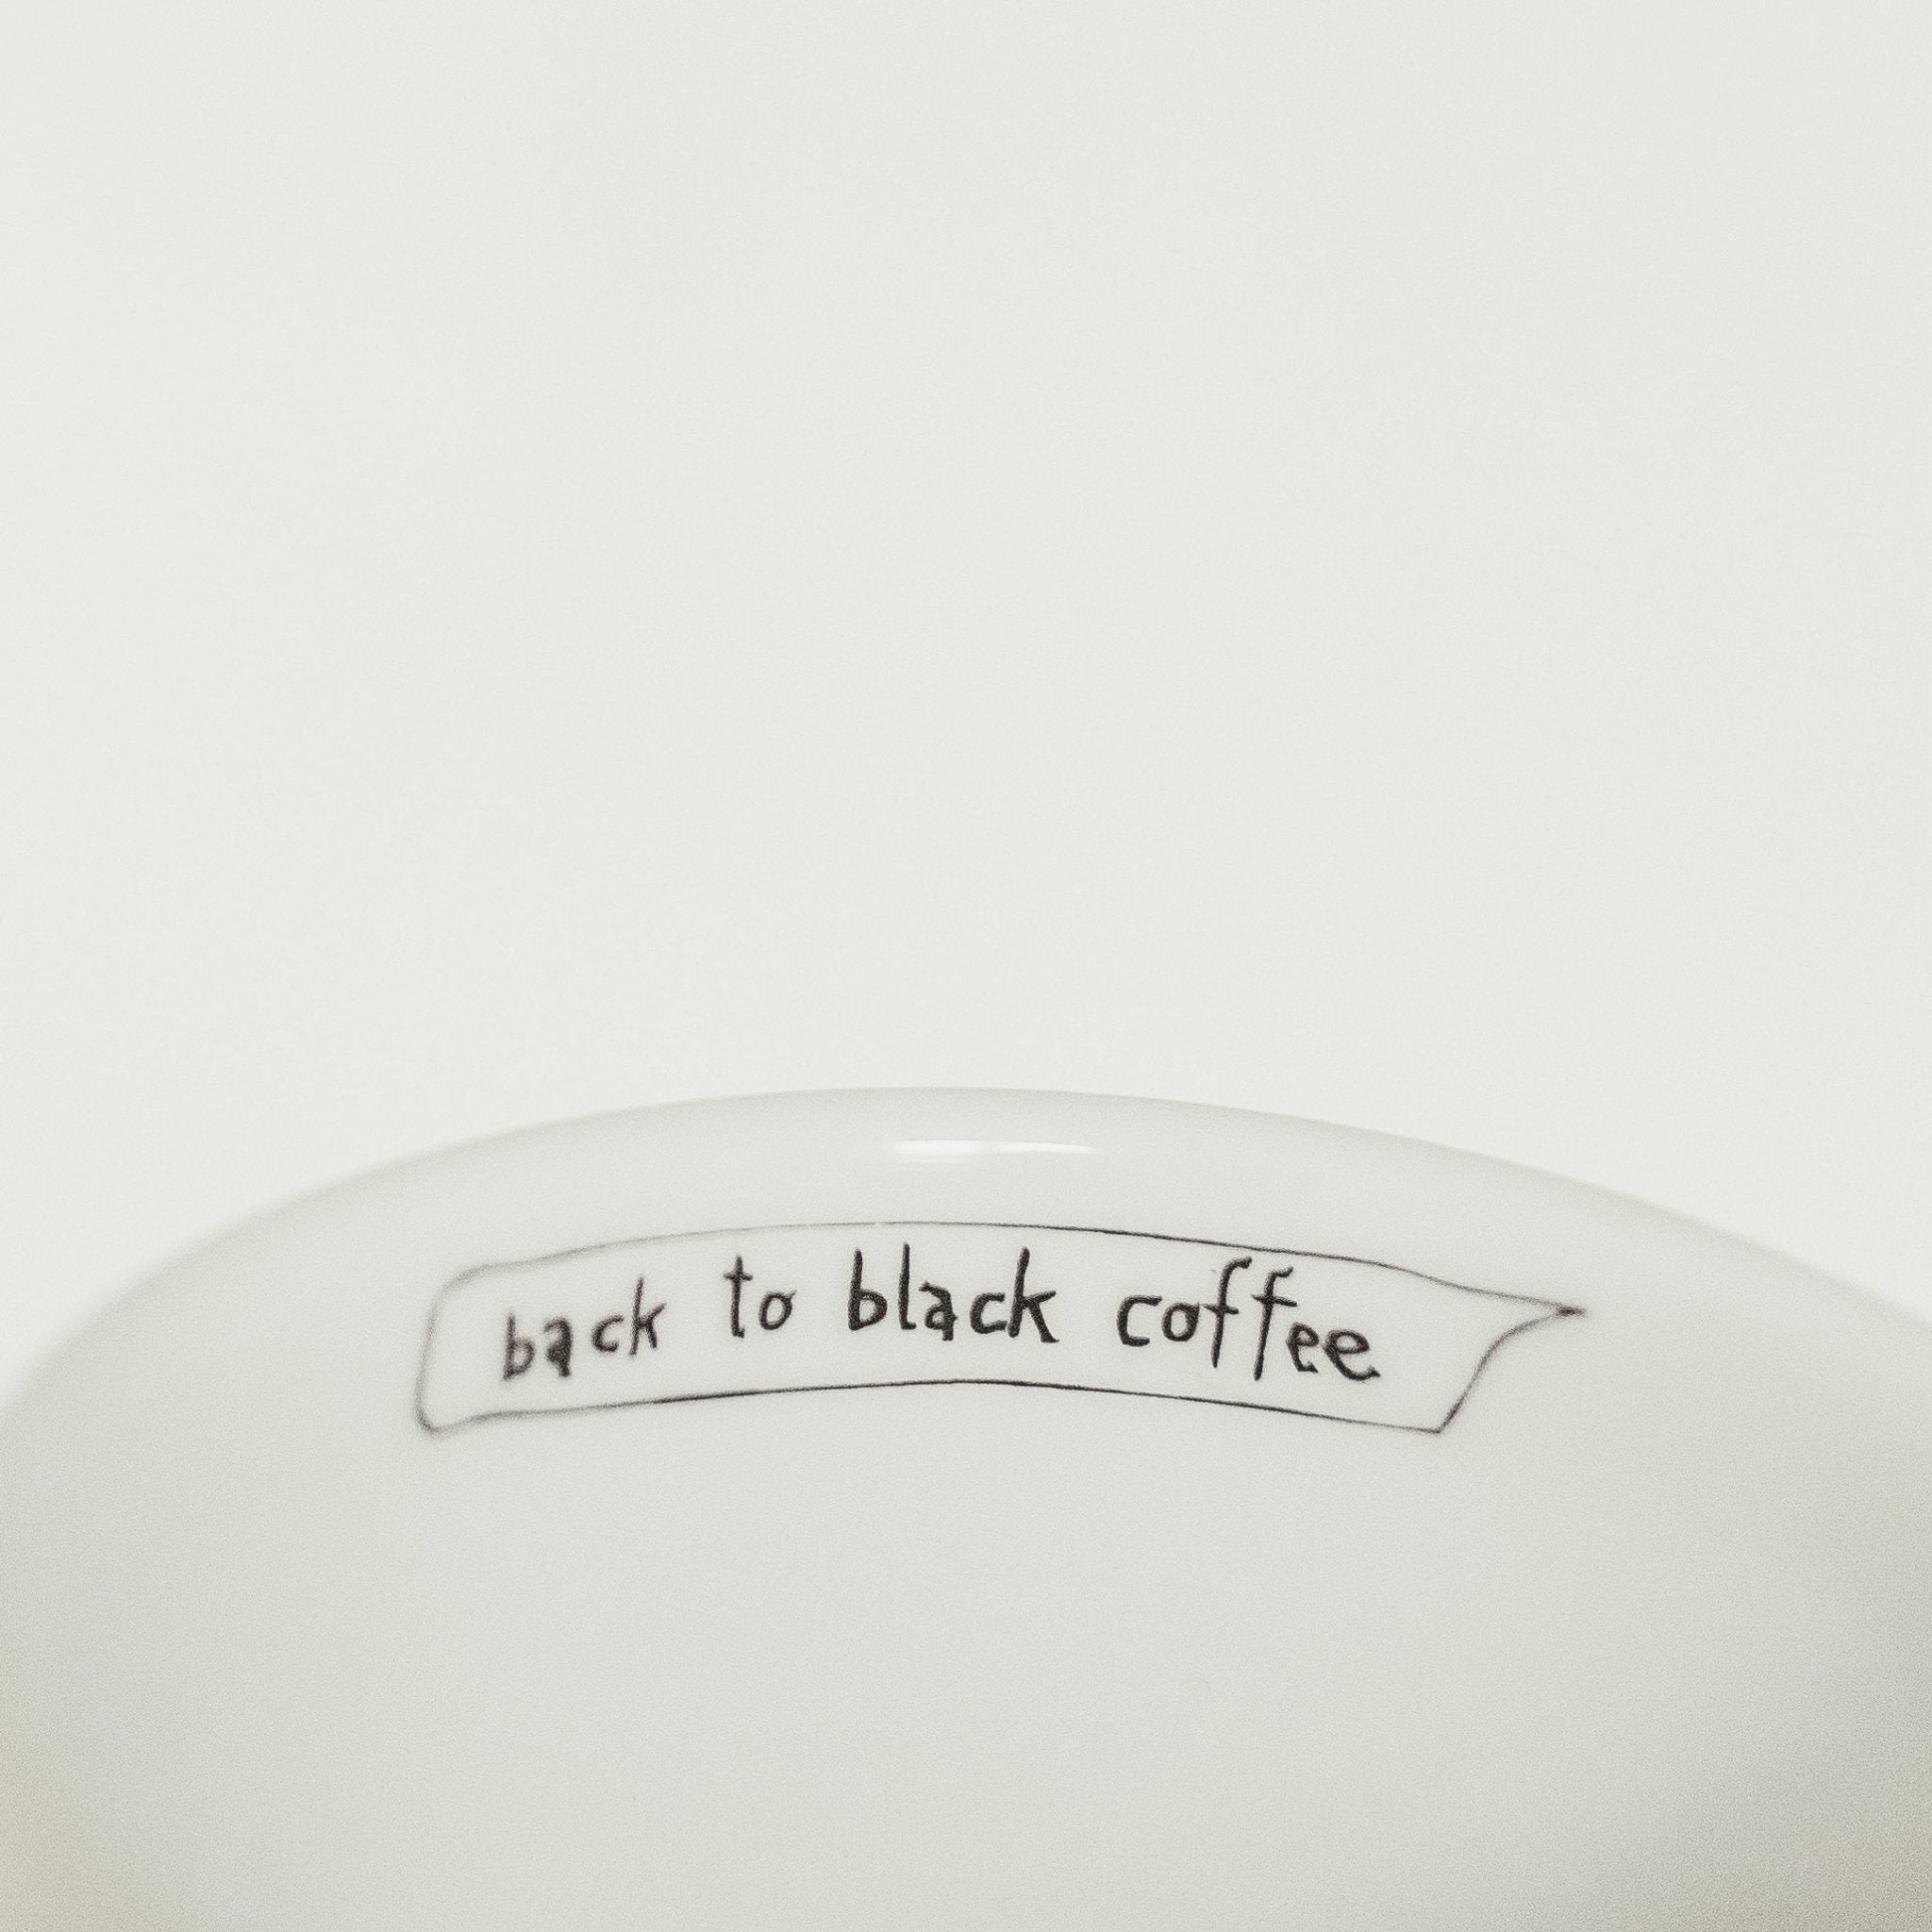 Porcelain cup inspired by Amy Winehouse text inside of the cup